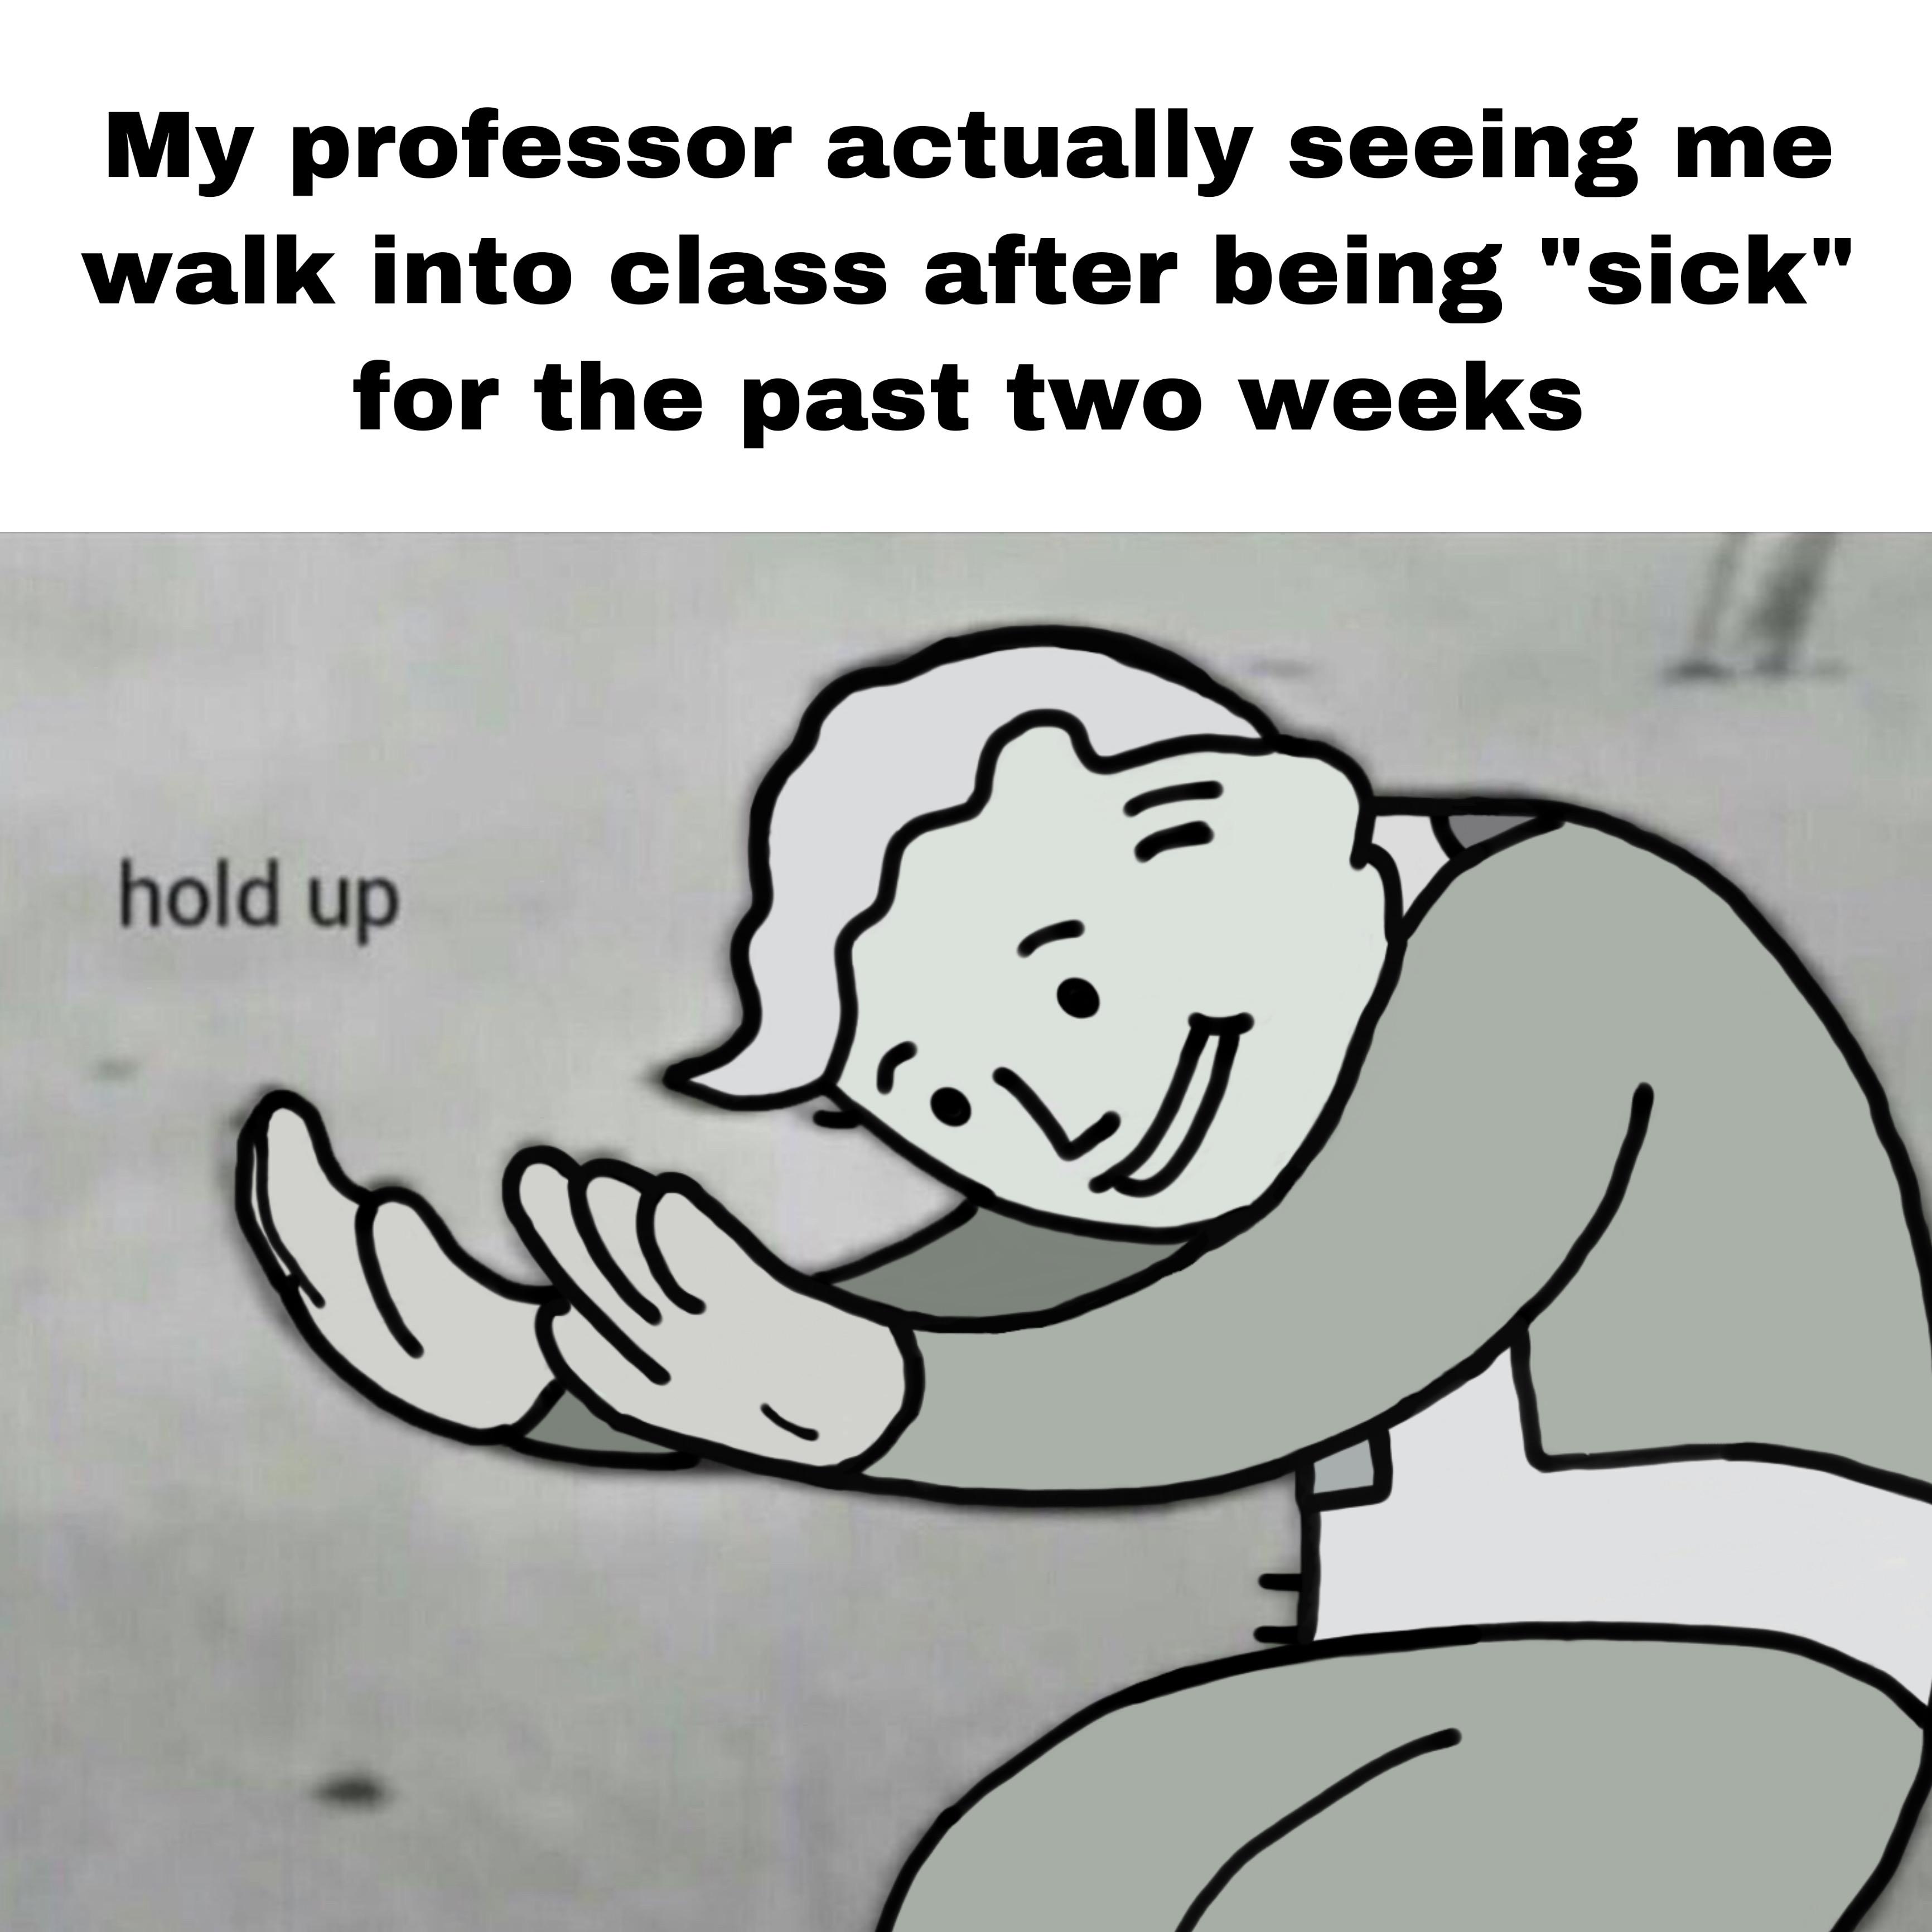 college dank memes - hold up meme - My professor actually seeing me walk into class after being "sick" for the past two weeks hold up